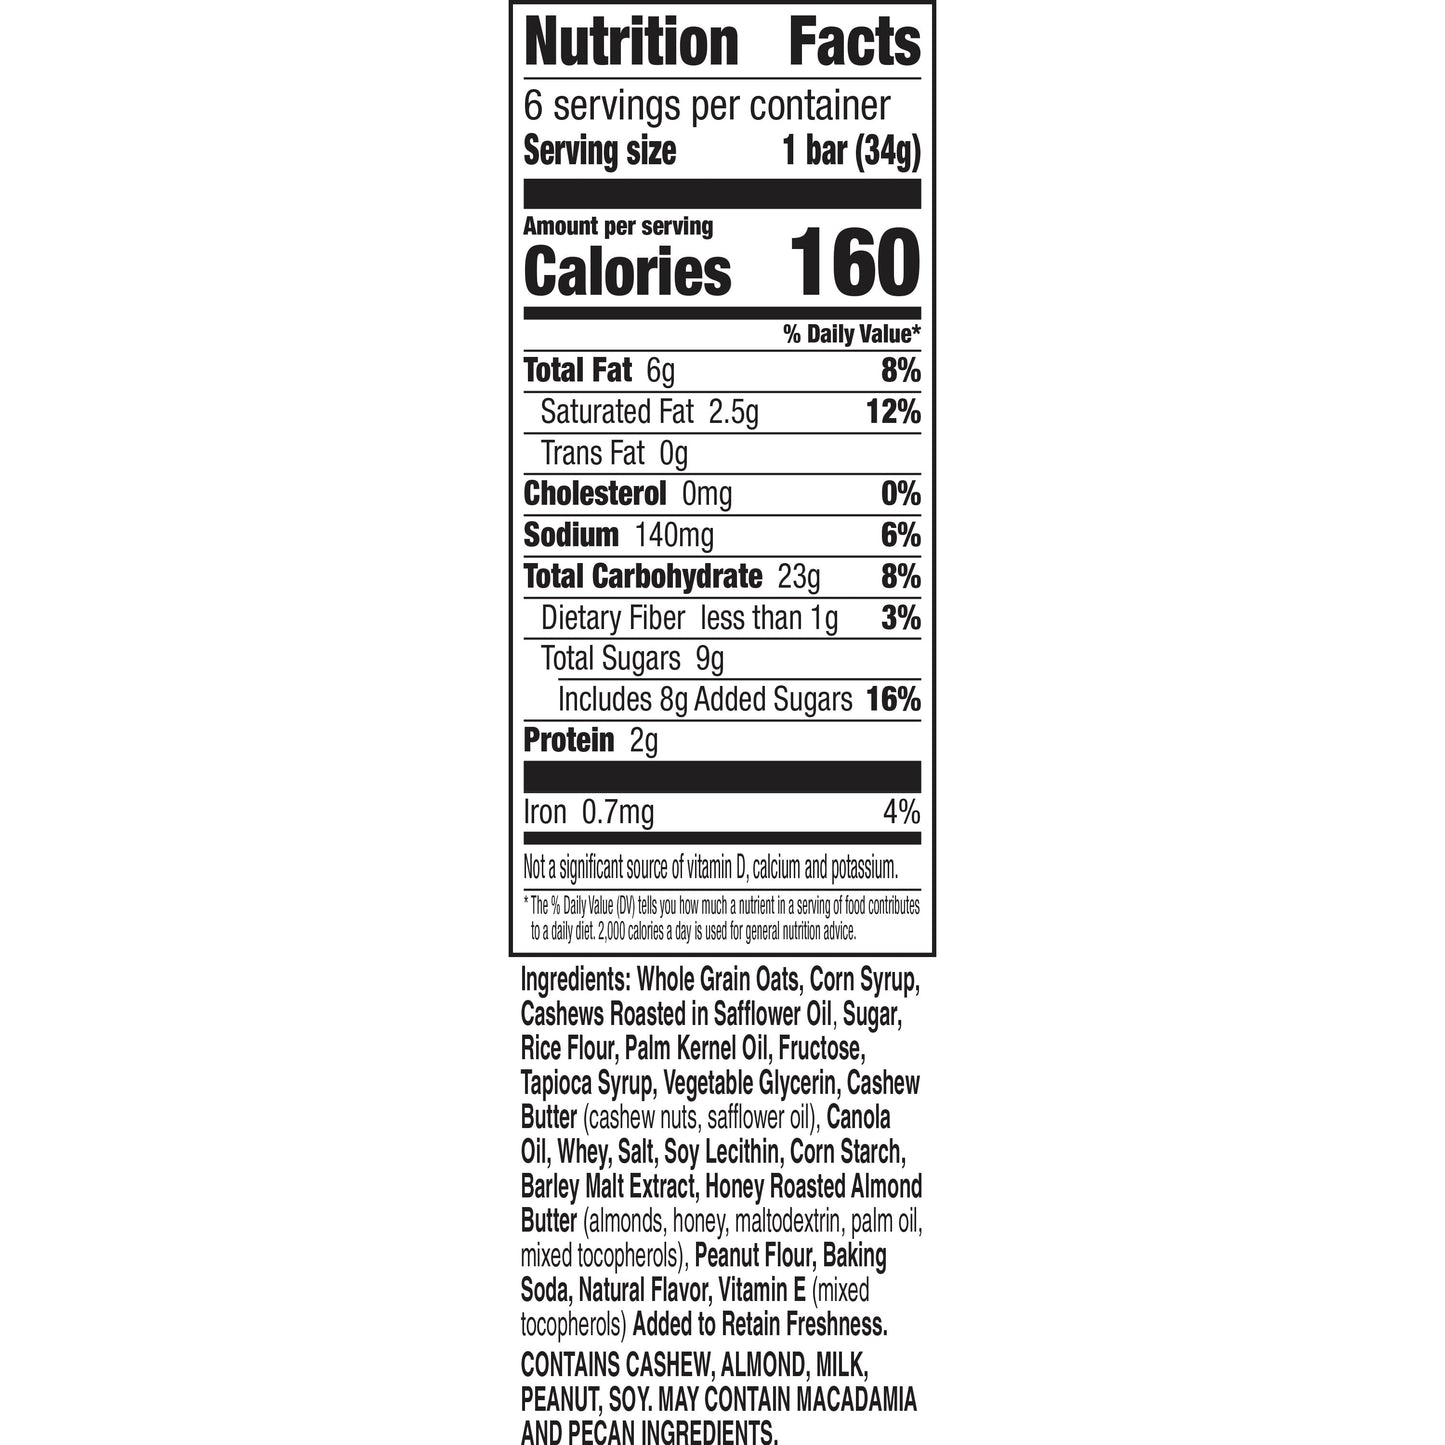 Nature Valley Granola Bars, Sweet and Salty Nut, Cashew, 6 Bars, 7.2 OZ